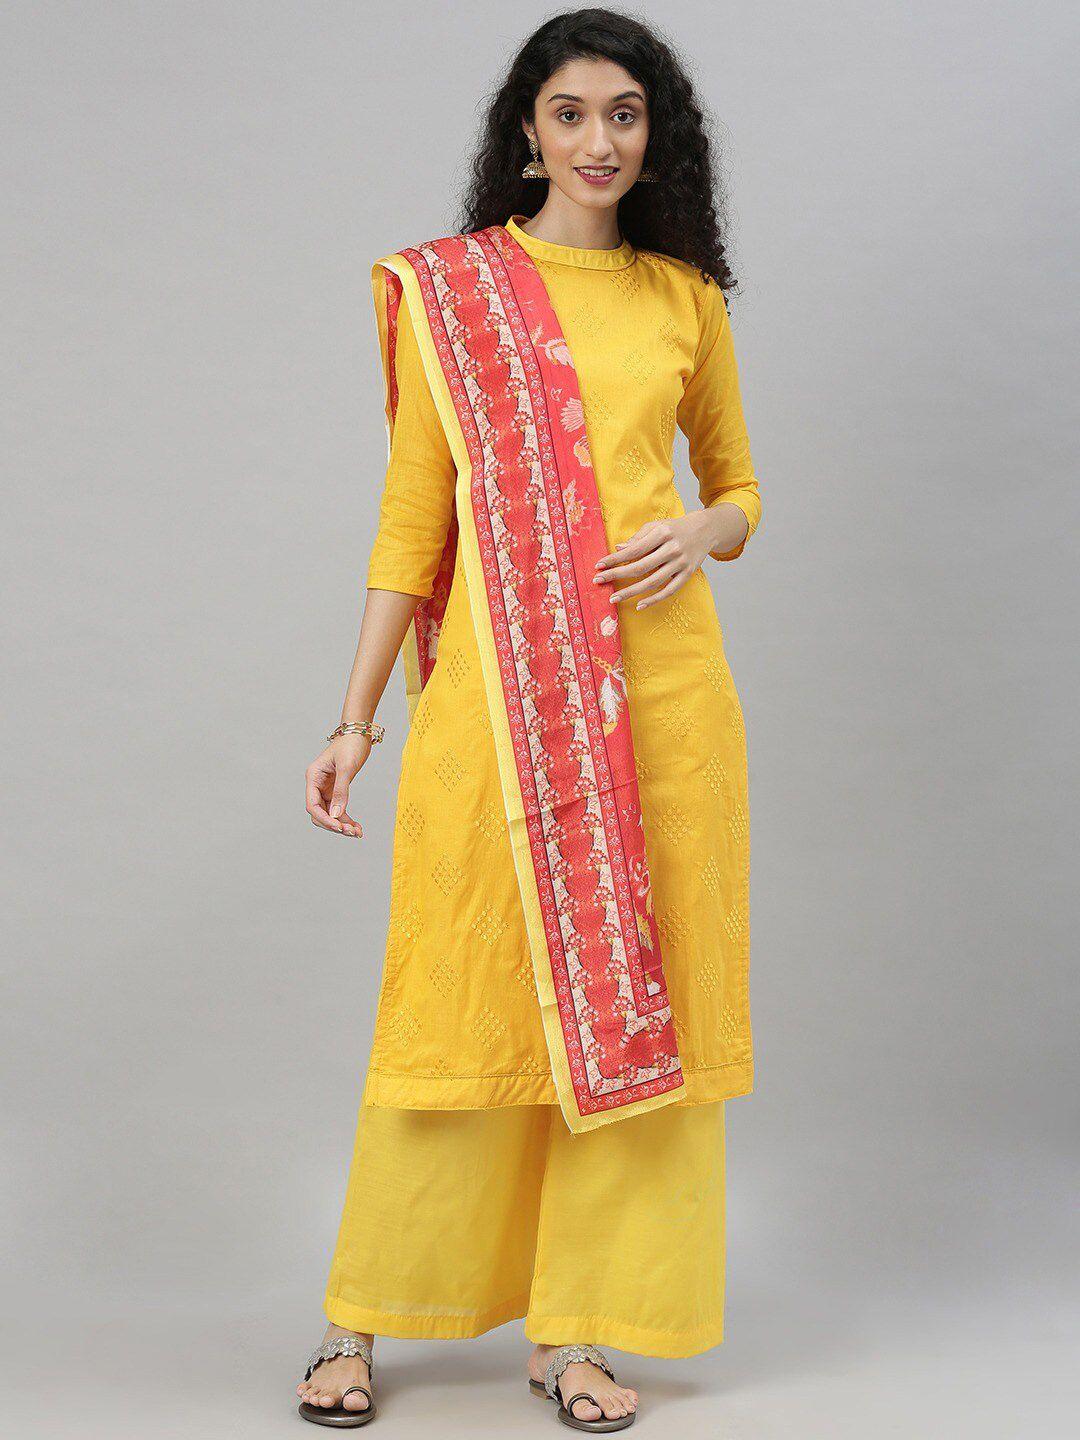 divastri embroidered unstitched dress material